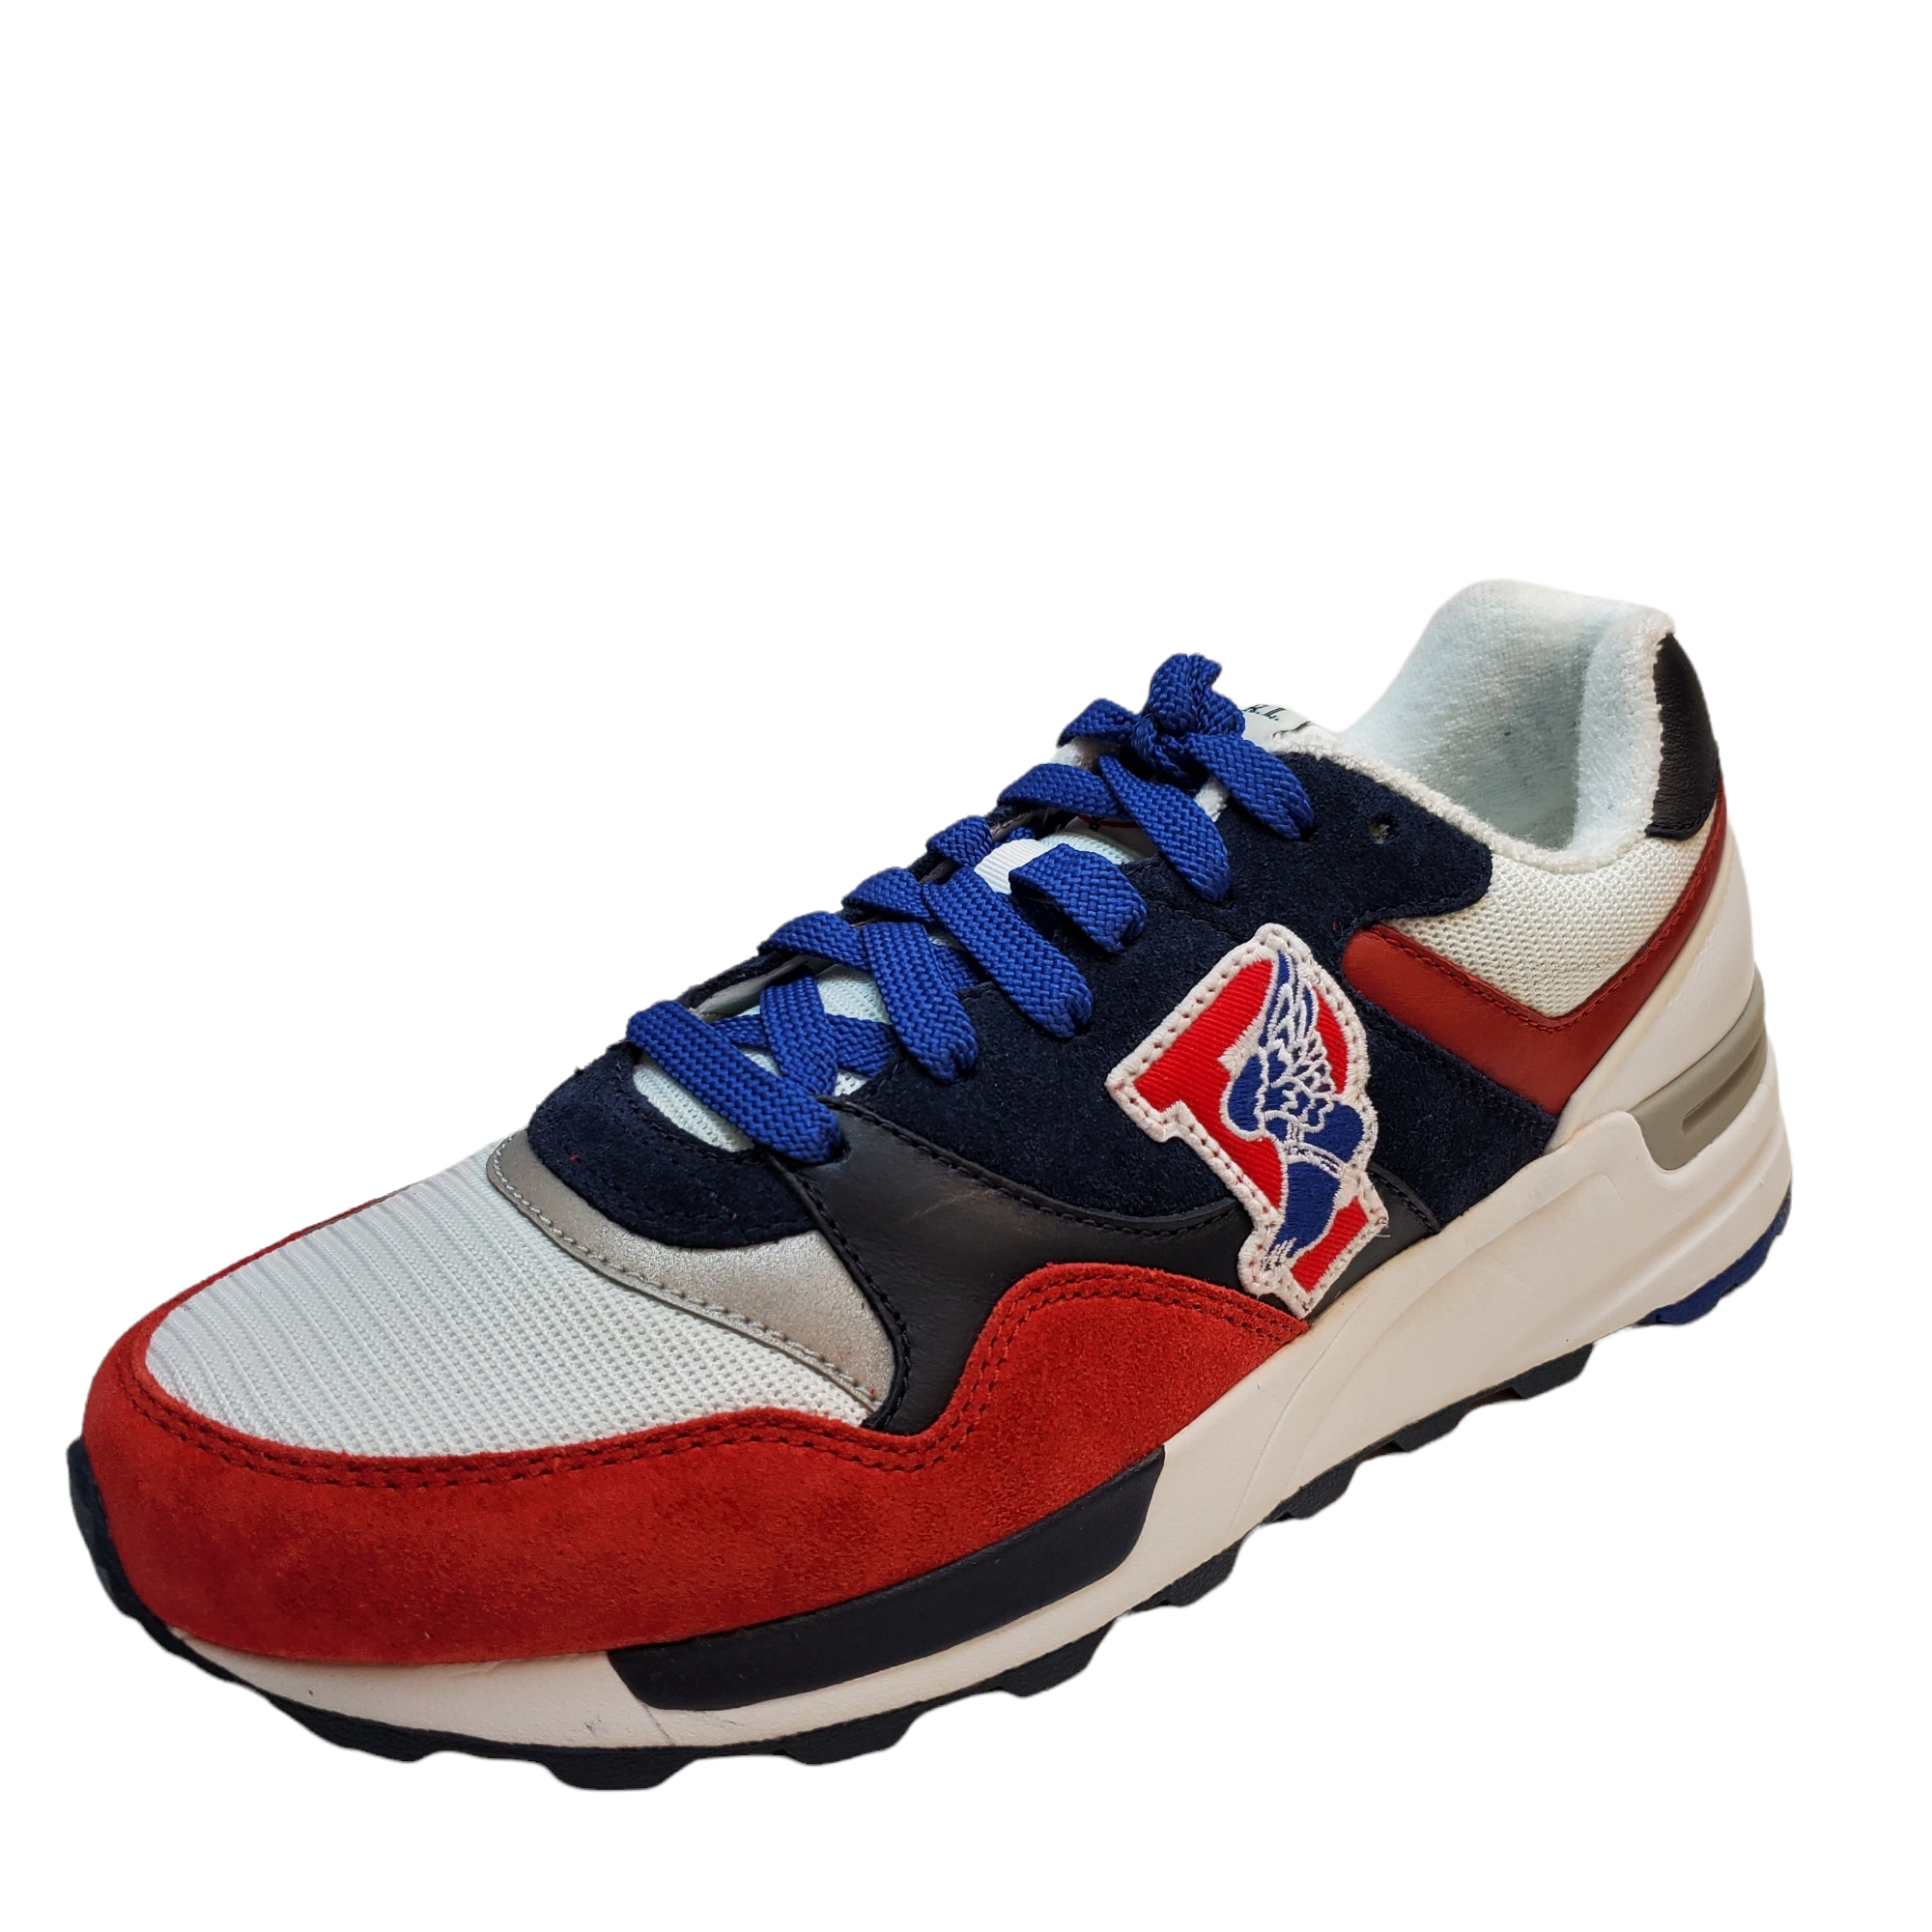 Polo Ralph Lauren Mens Shoes Trackster 100 Leather Athletic Sneakers 8.5D  Red Blue Affordable Designer Brands | Affordable Designer Brands